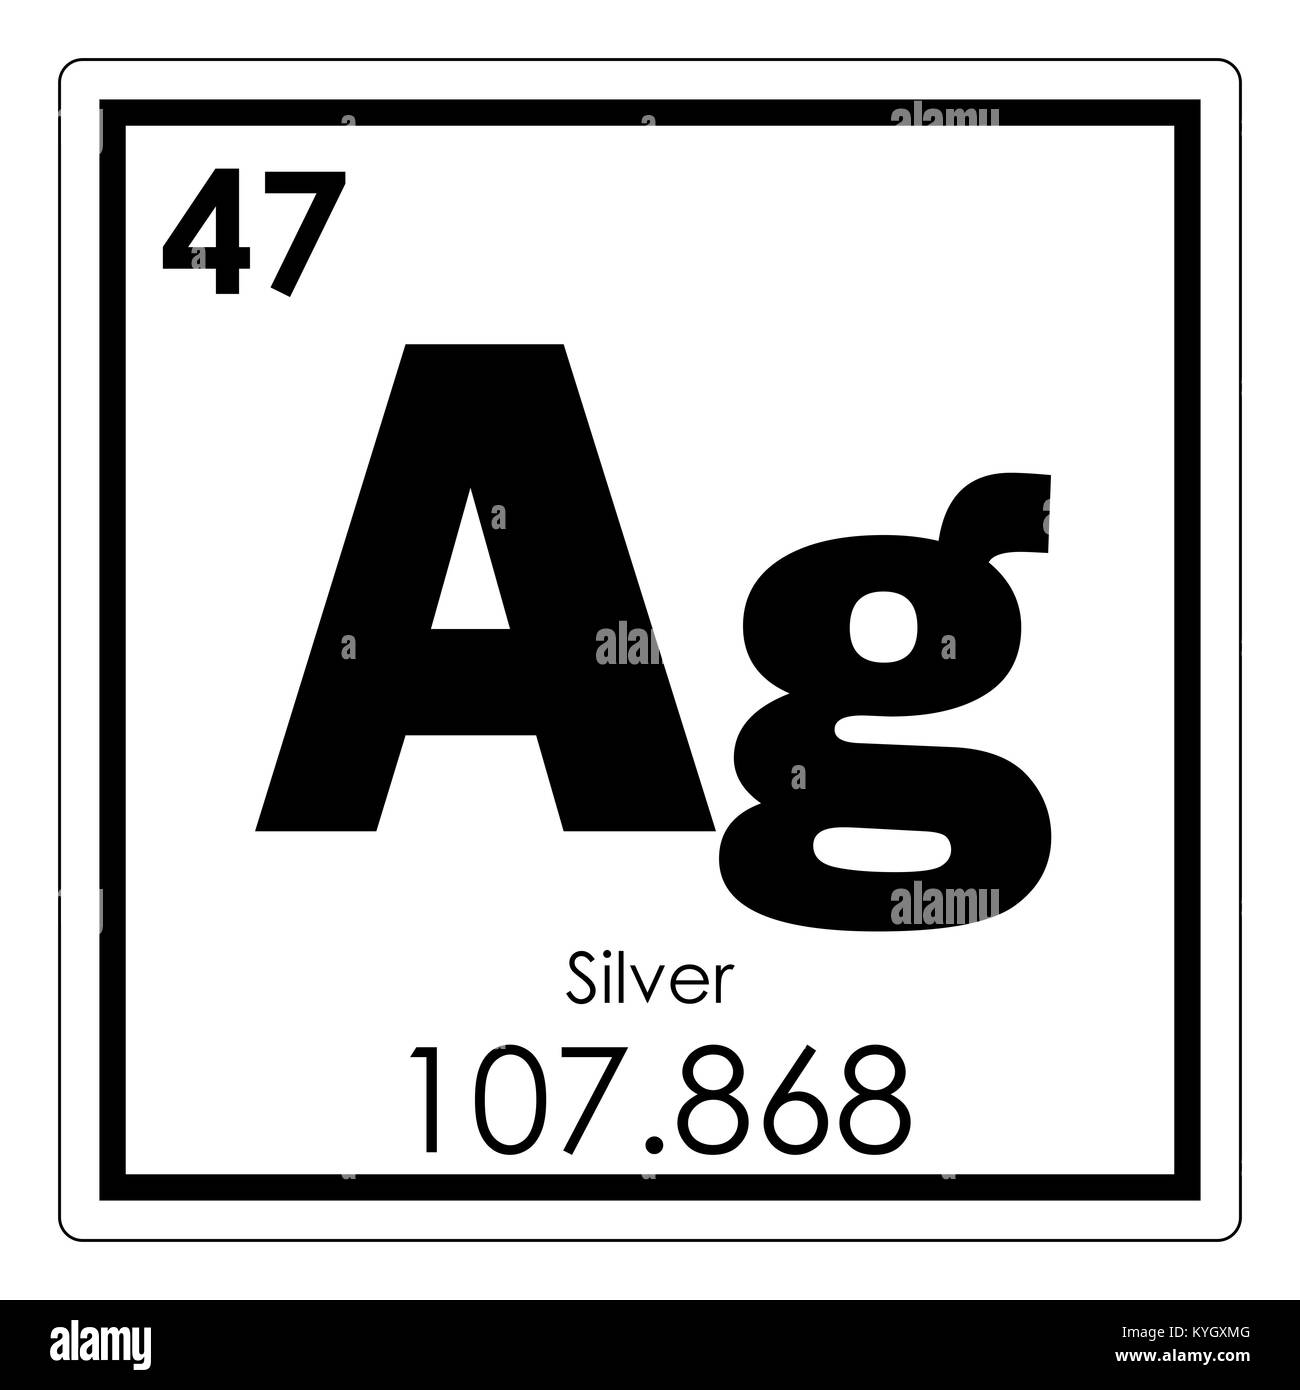 Silver chemical element periodic table science symbol Stock Photo - Alamy